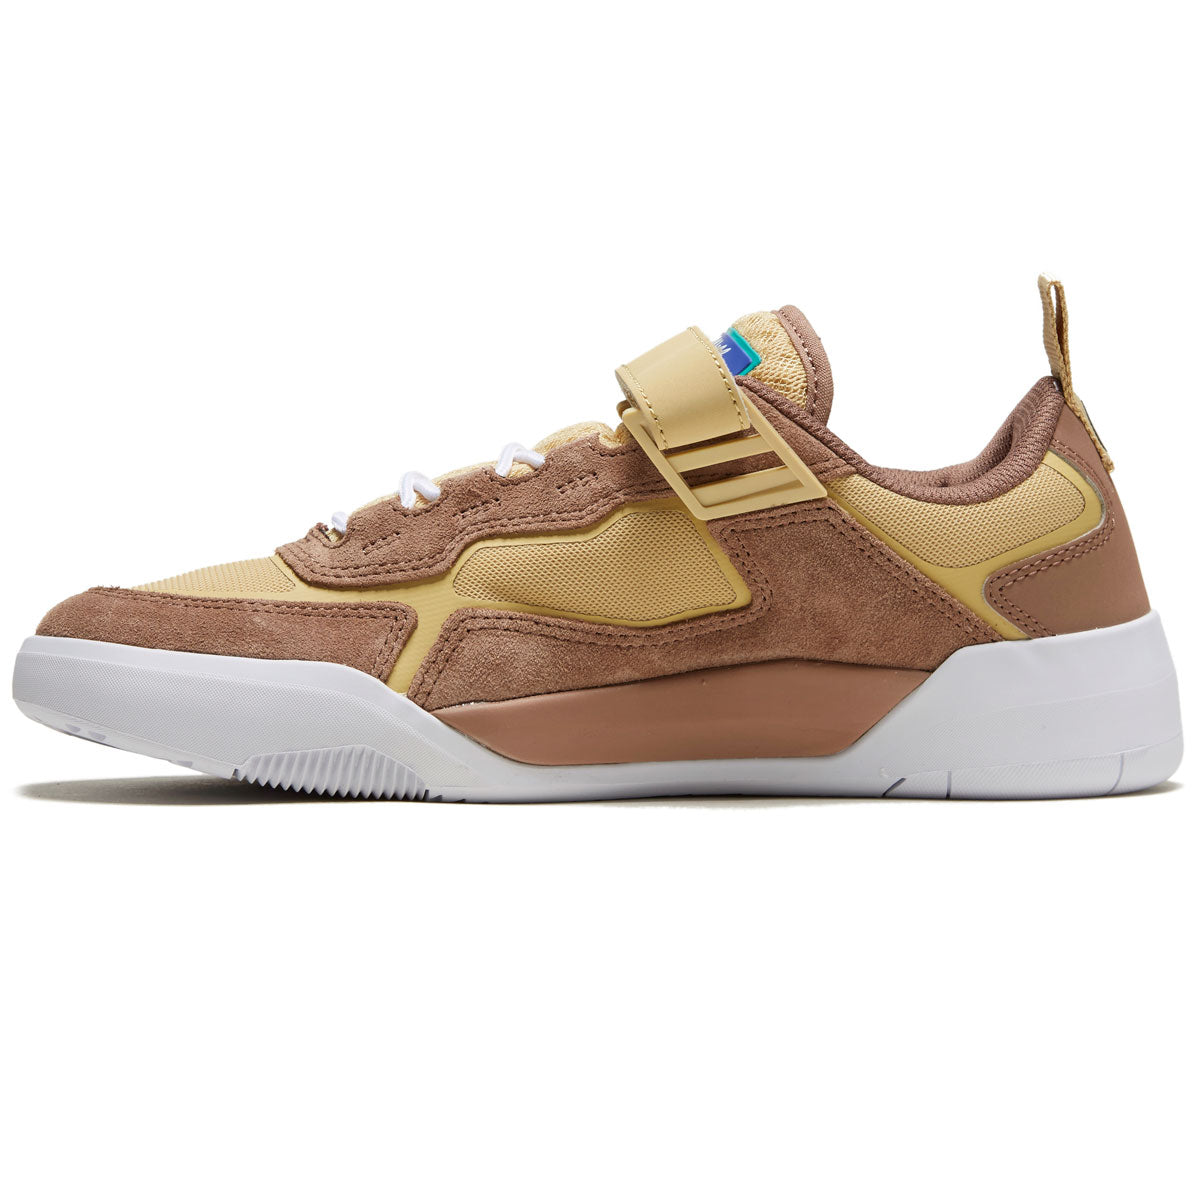 DC Metric S x Will Shoes - Brown/Tan image 2